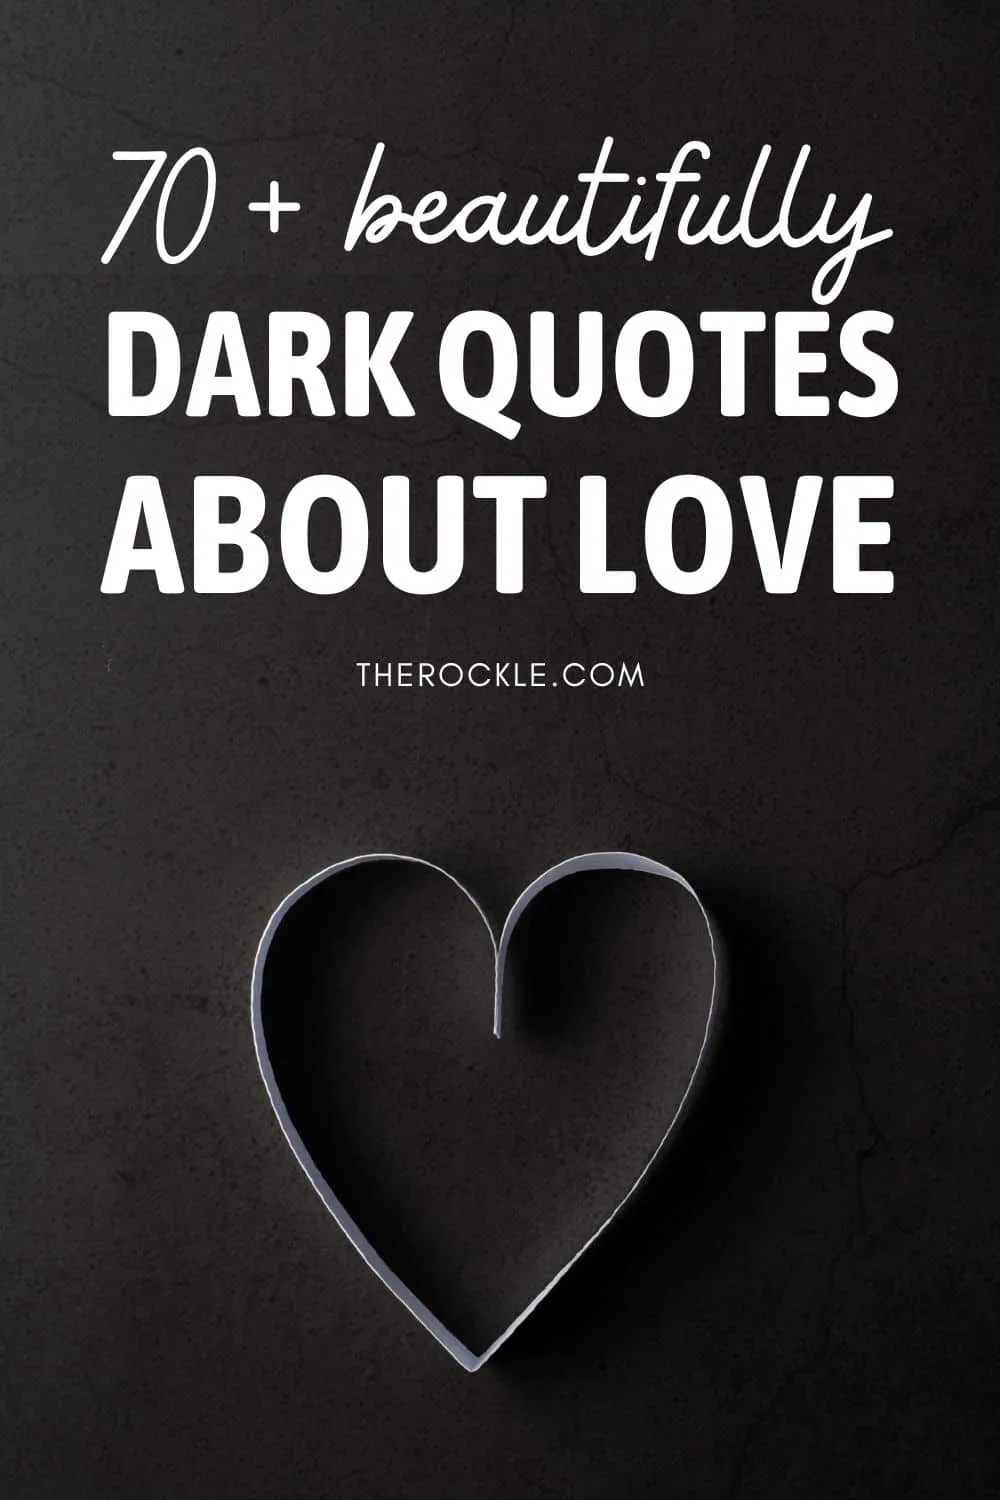 Beautifully Dark Quotes About Love Pinterest